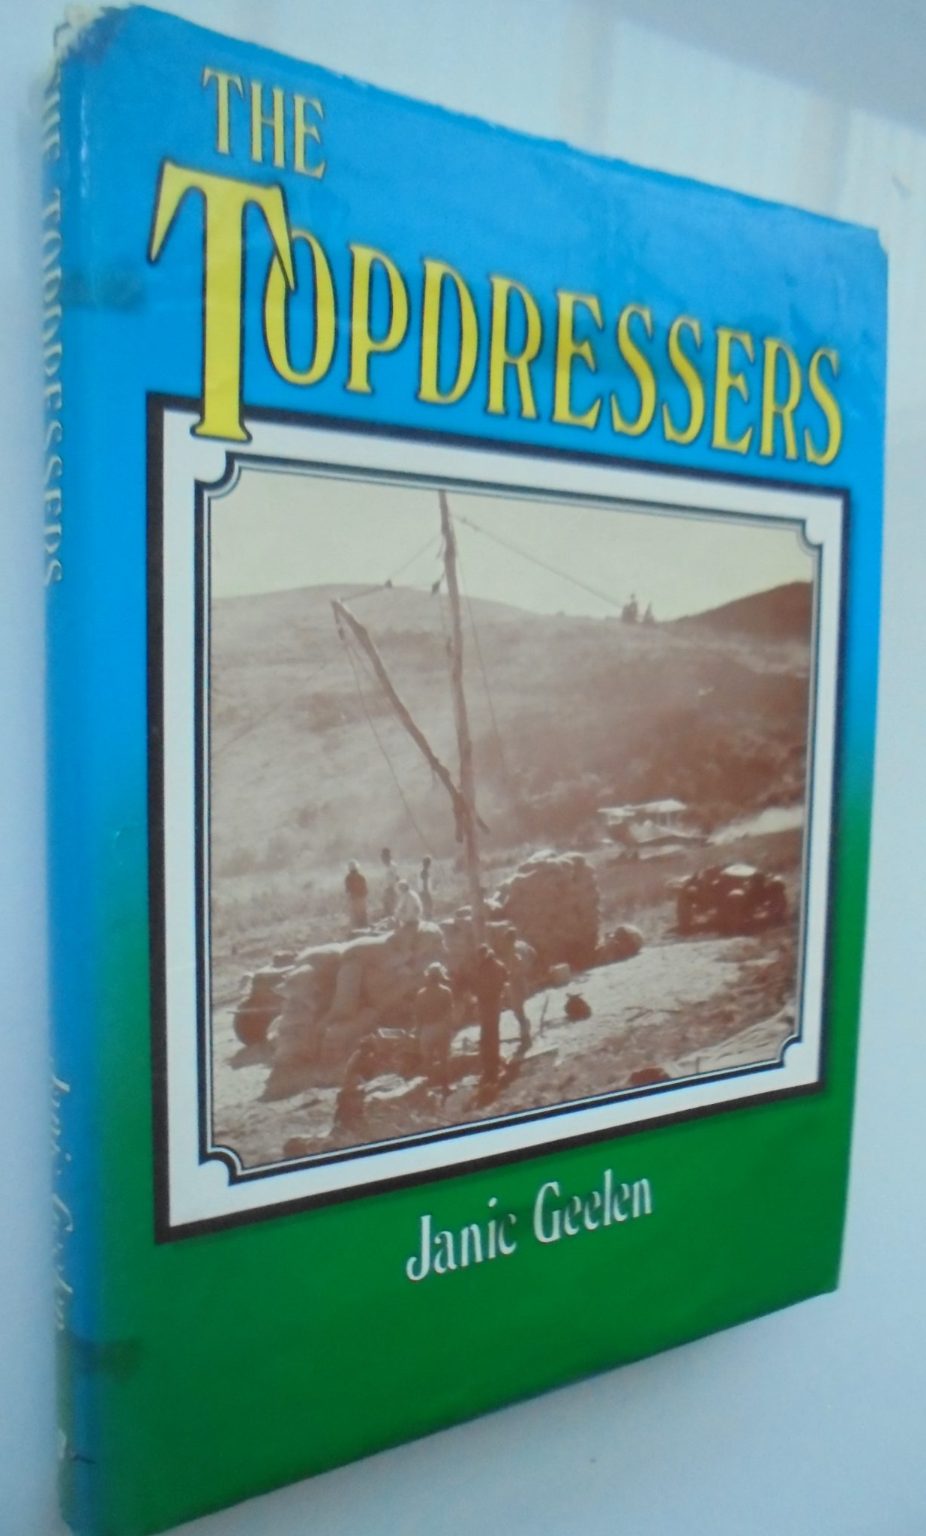 The Topdressers By Janic Geelen. 1983, FIRST EDITION. VERY SCARCE.